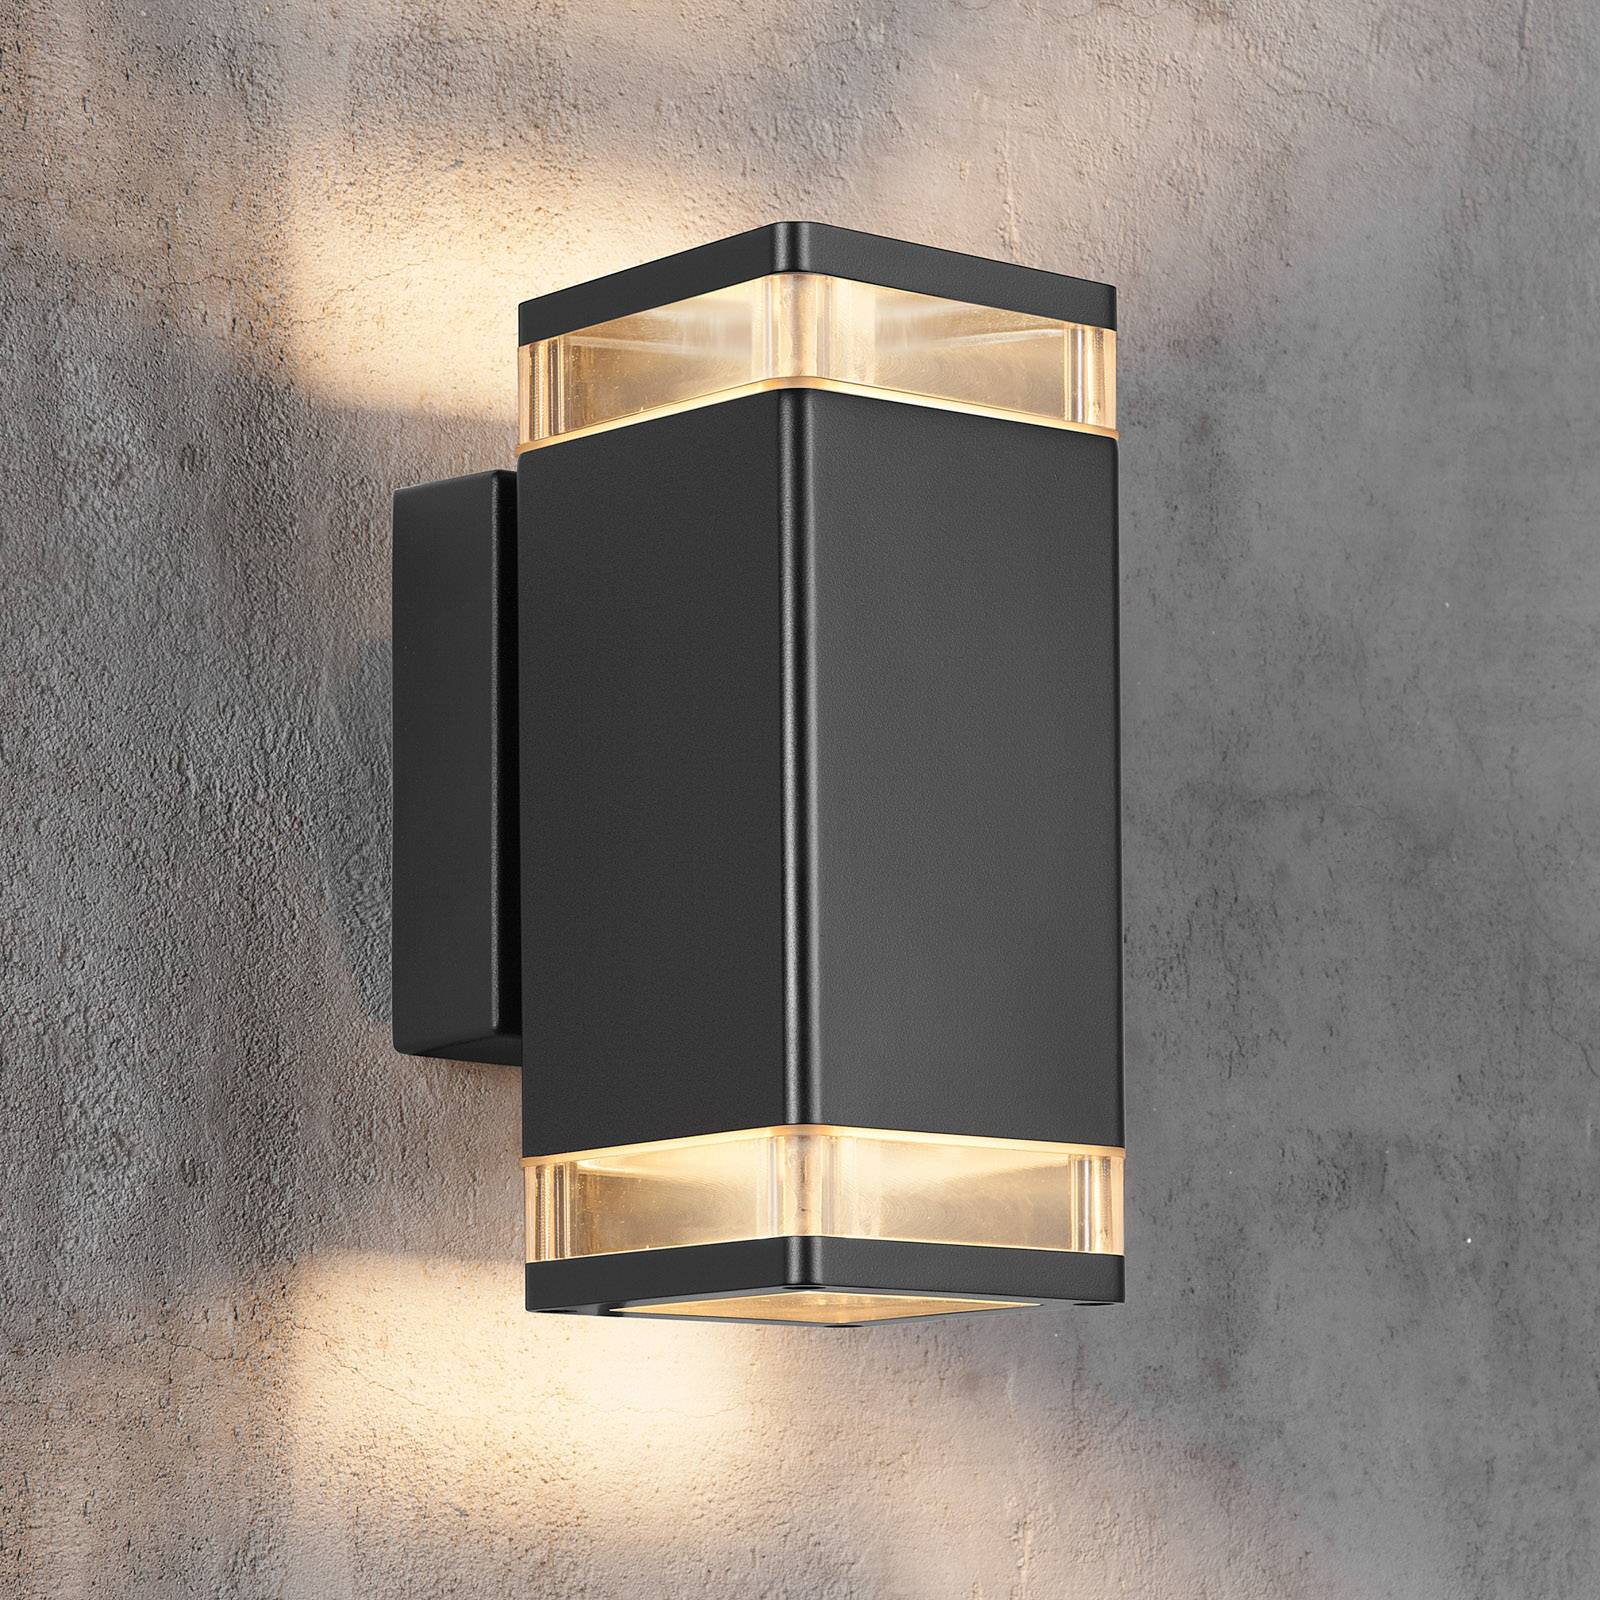 Photos - Chandelier / Lamp Nordlux Elm outdoor wall light in black, two-bulb 